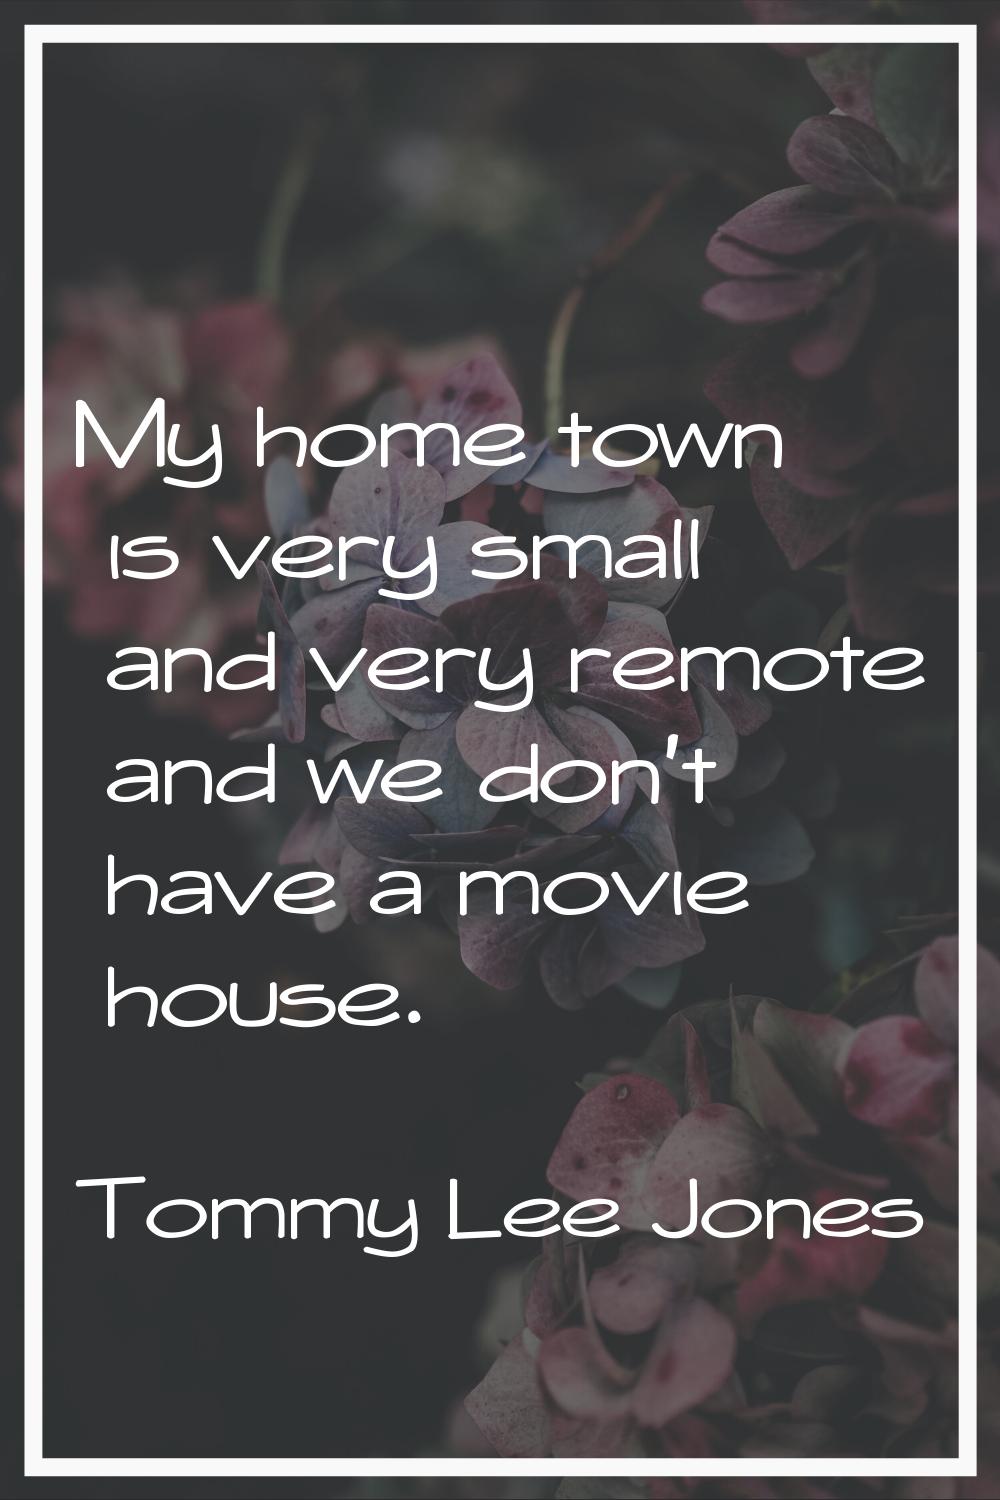 My home town is very small and very remote and we don't have a movie house.